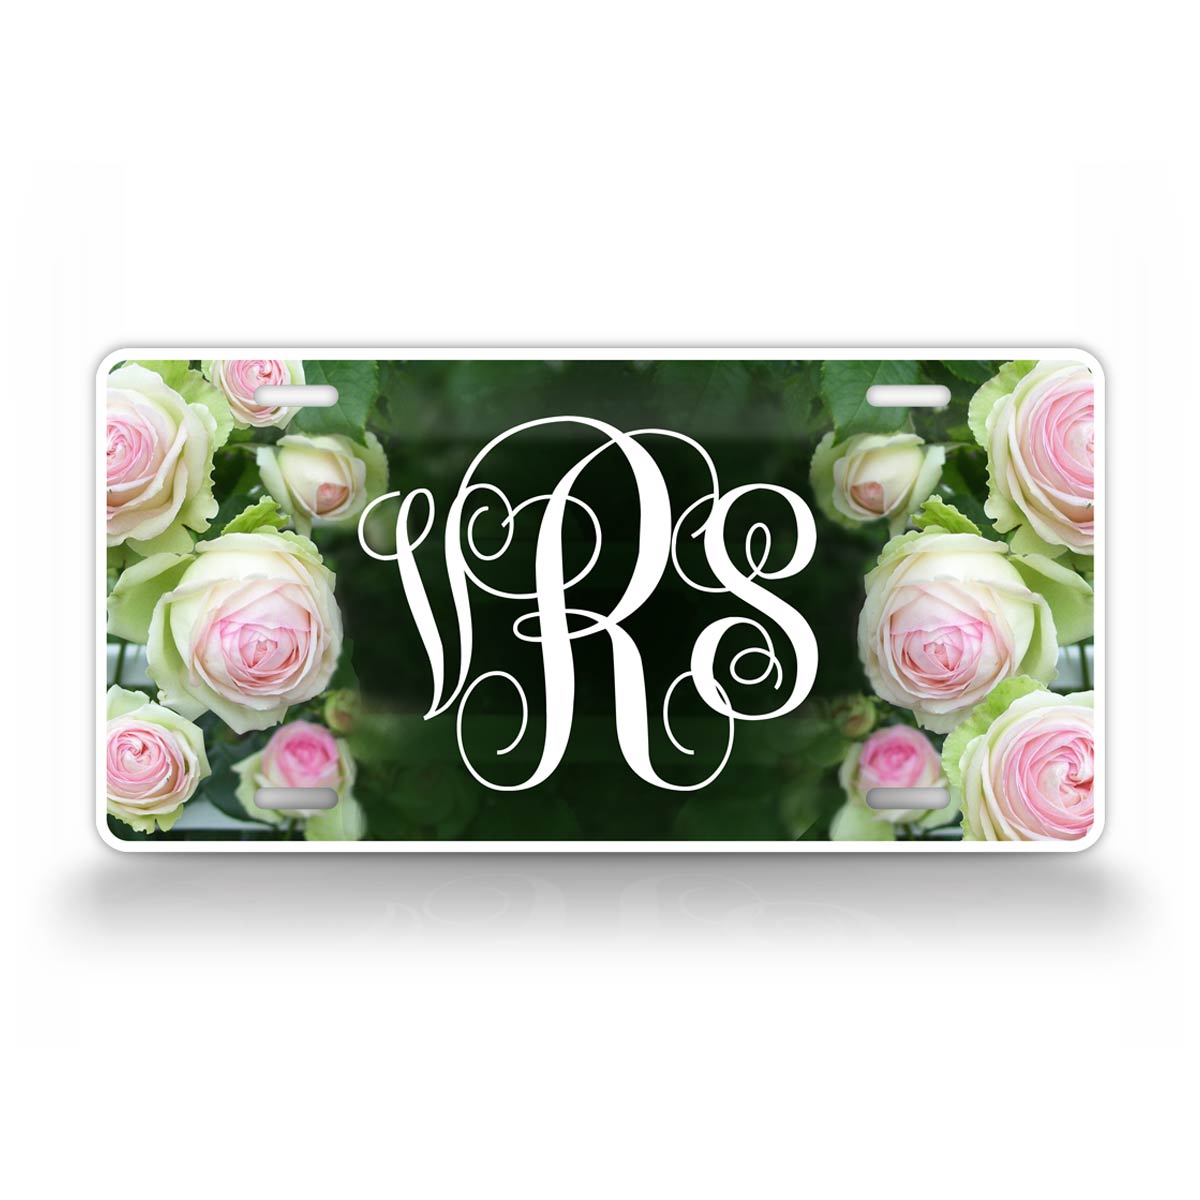 Personalized Photo Realistic Rose Monogram License Plate